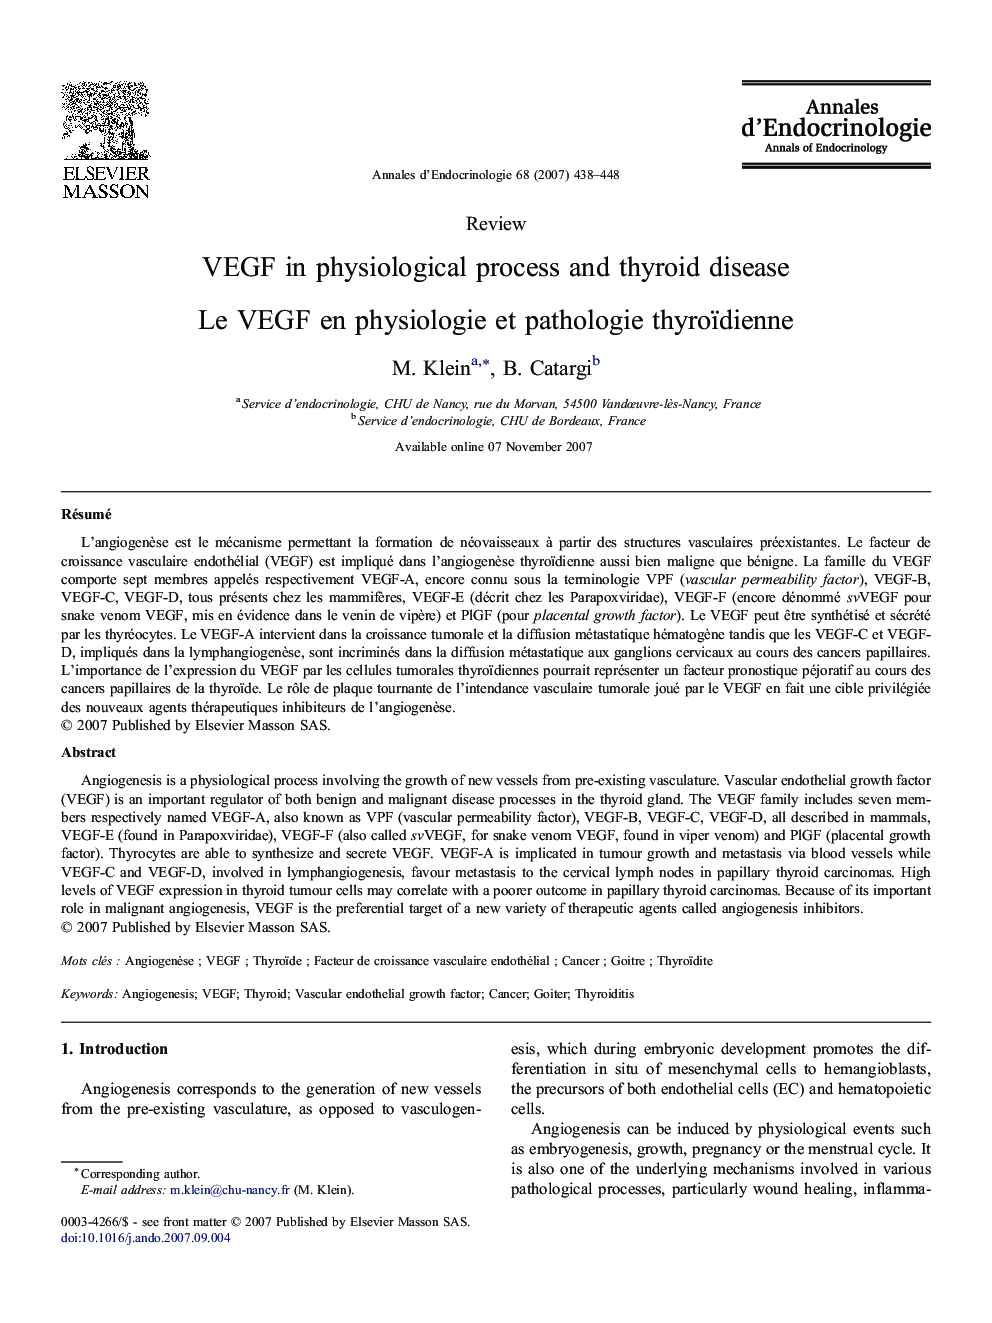 VEGF in physiological process and thyroid disease